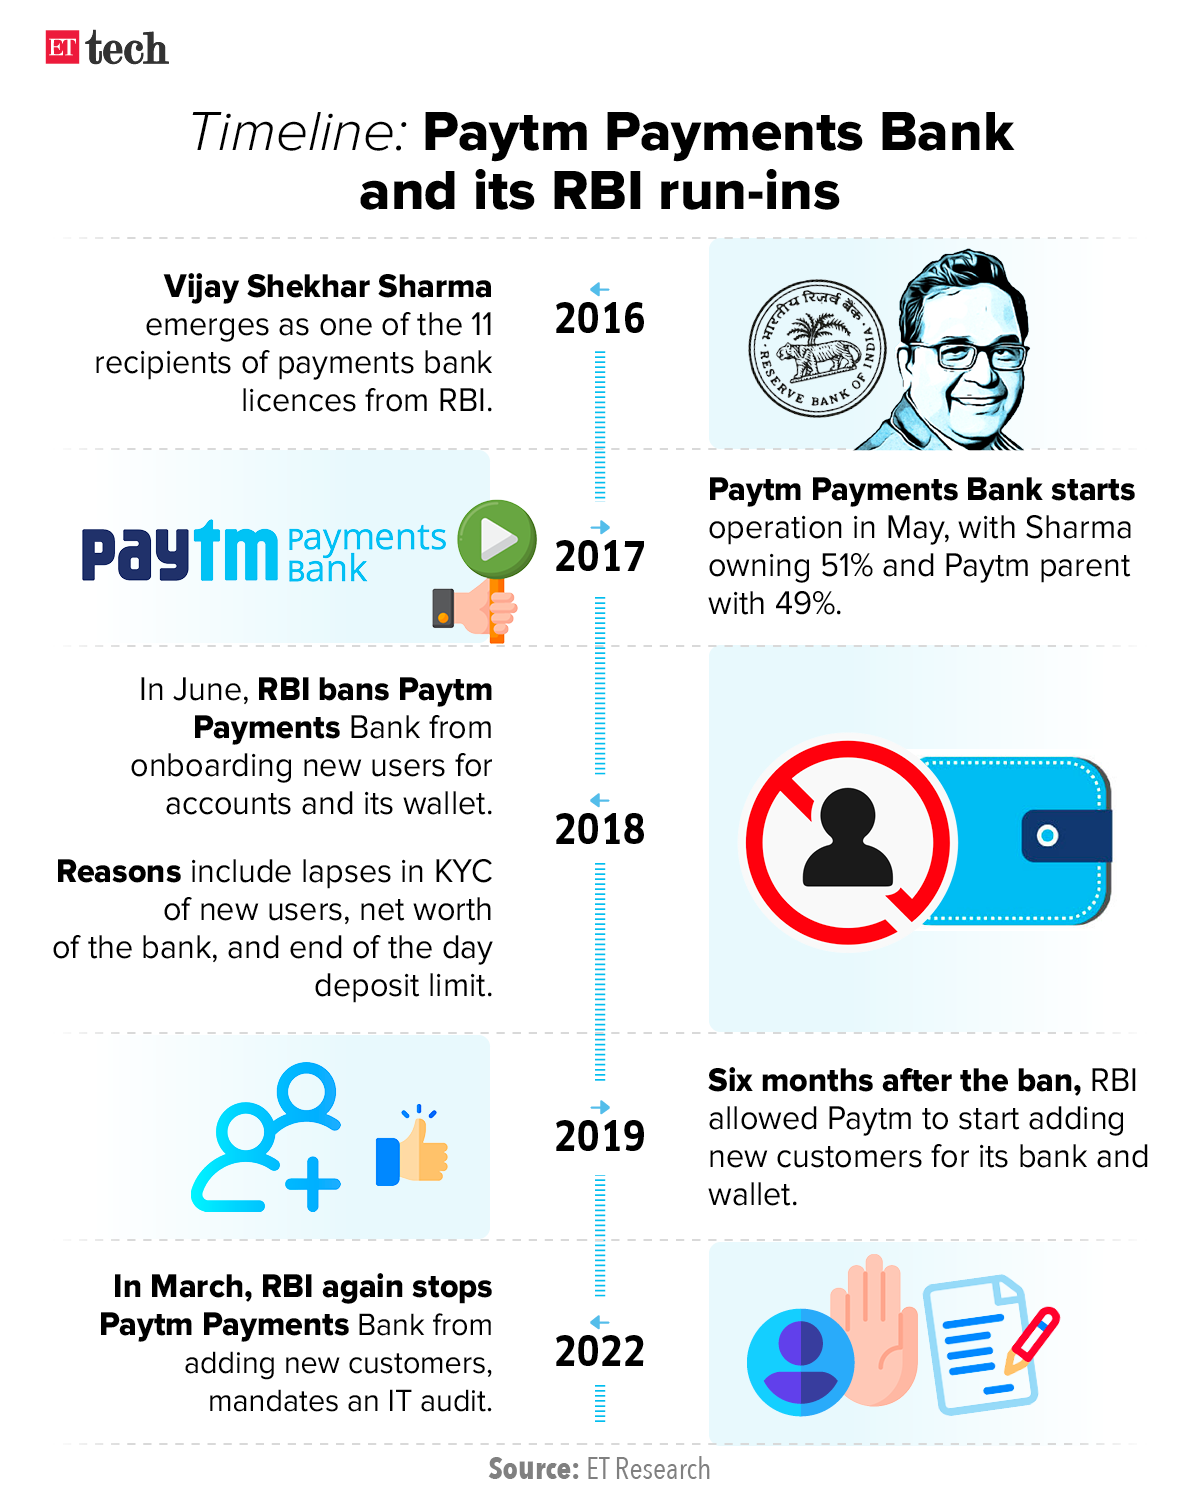 Paytm Payments Bank and its RBI run-ins_Timeline_Graphic_ETTECH